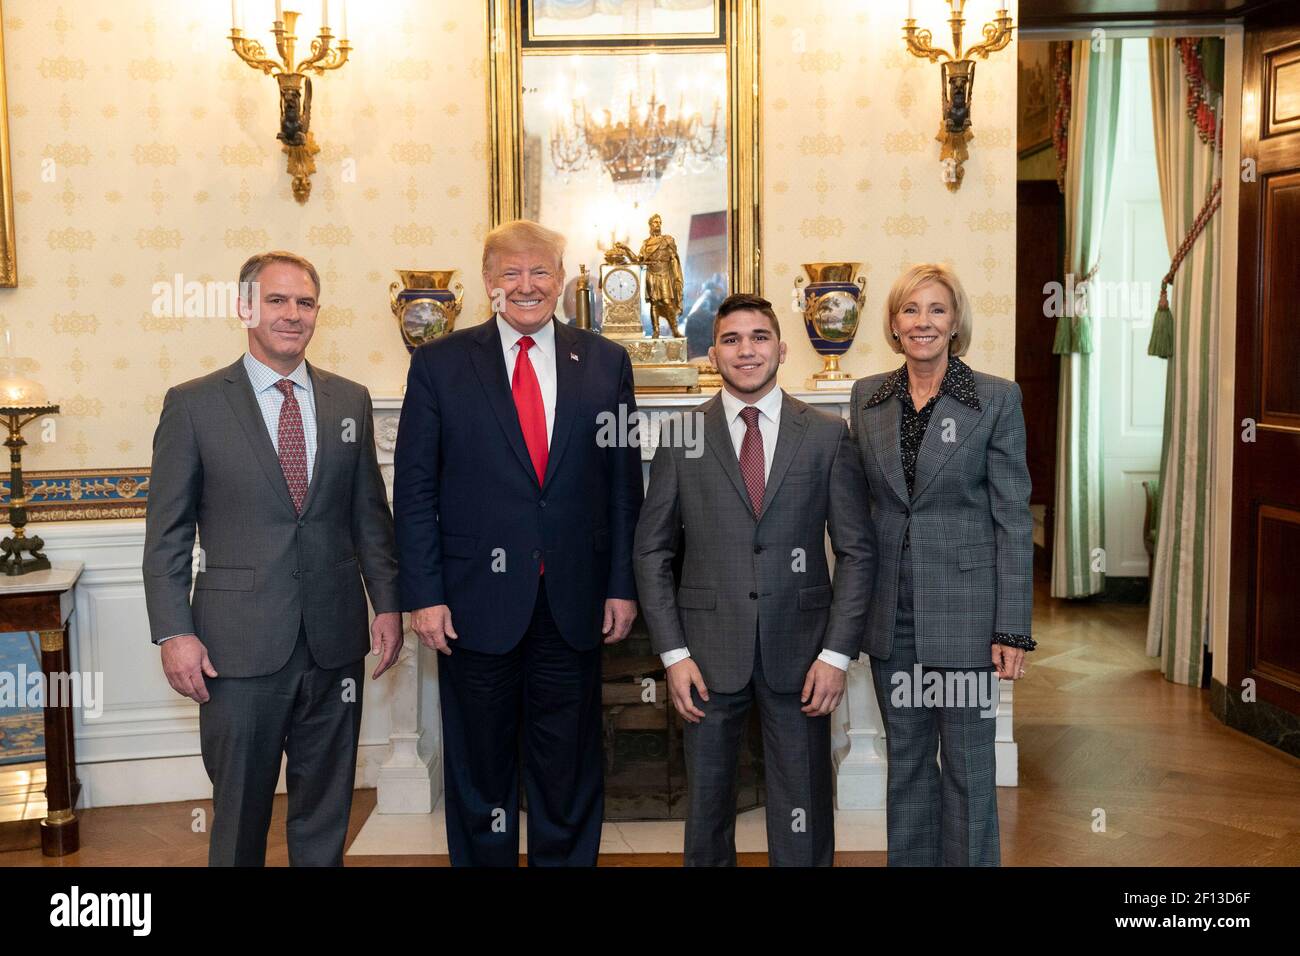 President Donald Trump poses with the 2019 NCAA Cornell University Men's Champion Wrestling team Friday Nov. 22 2019 during the NCAA Collegiate National Champions Day in the Blue Room of the White House. Stock Photo